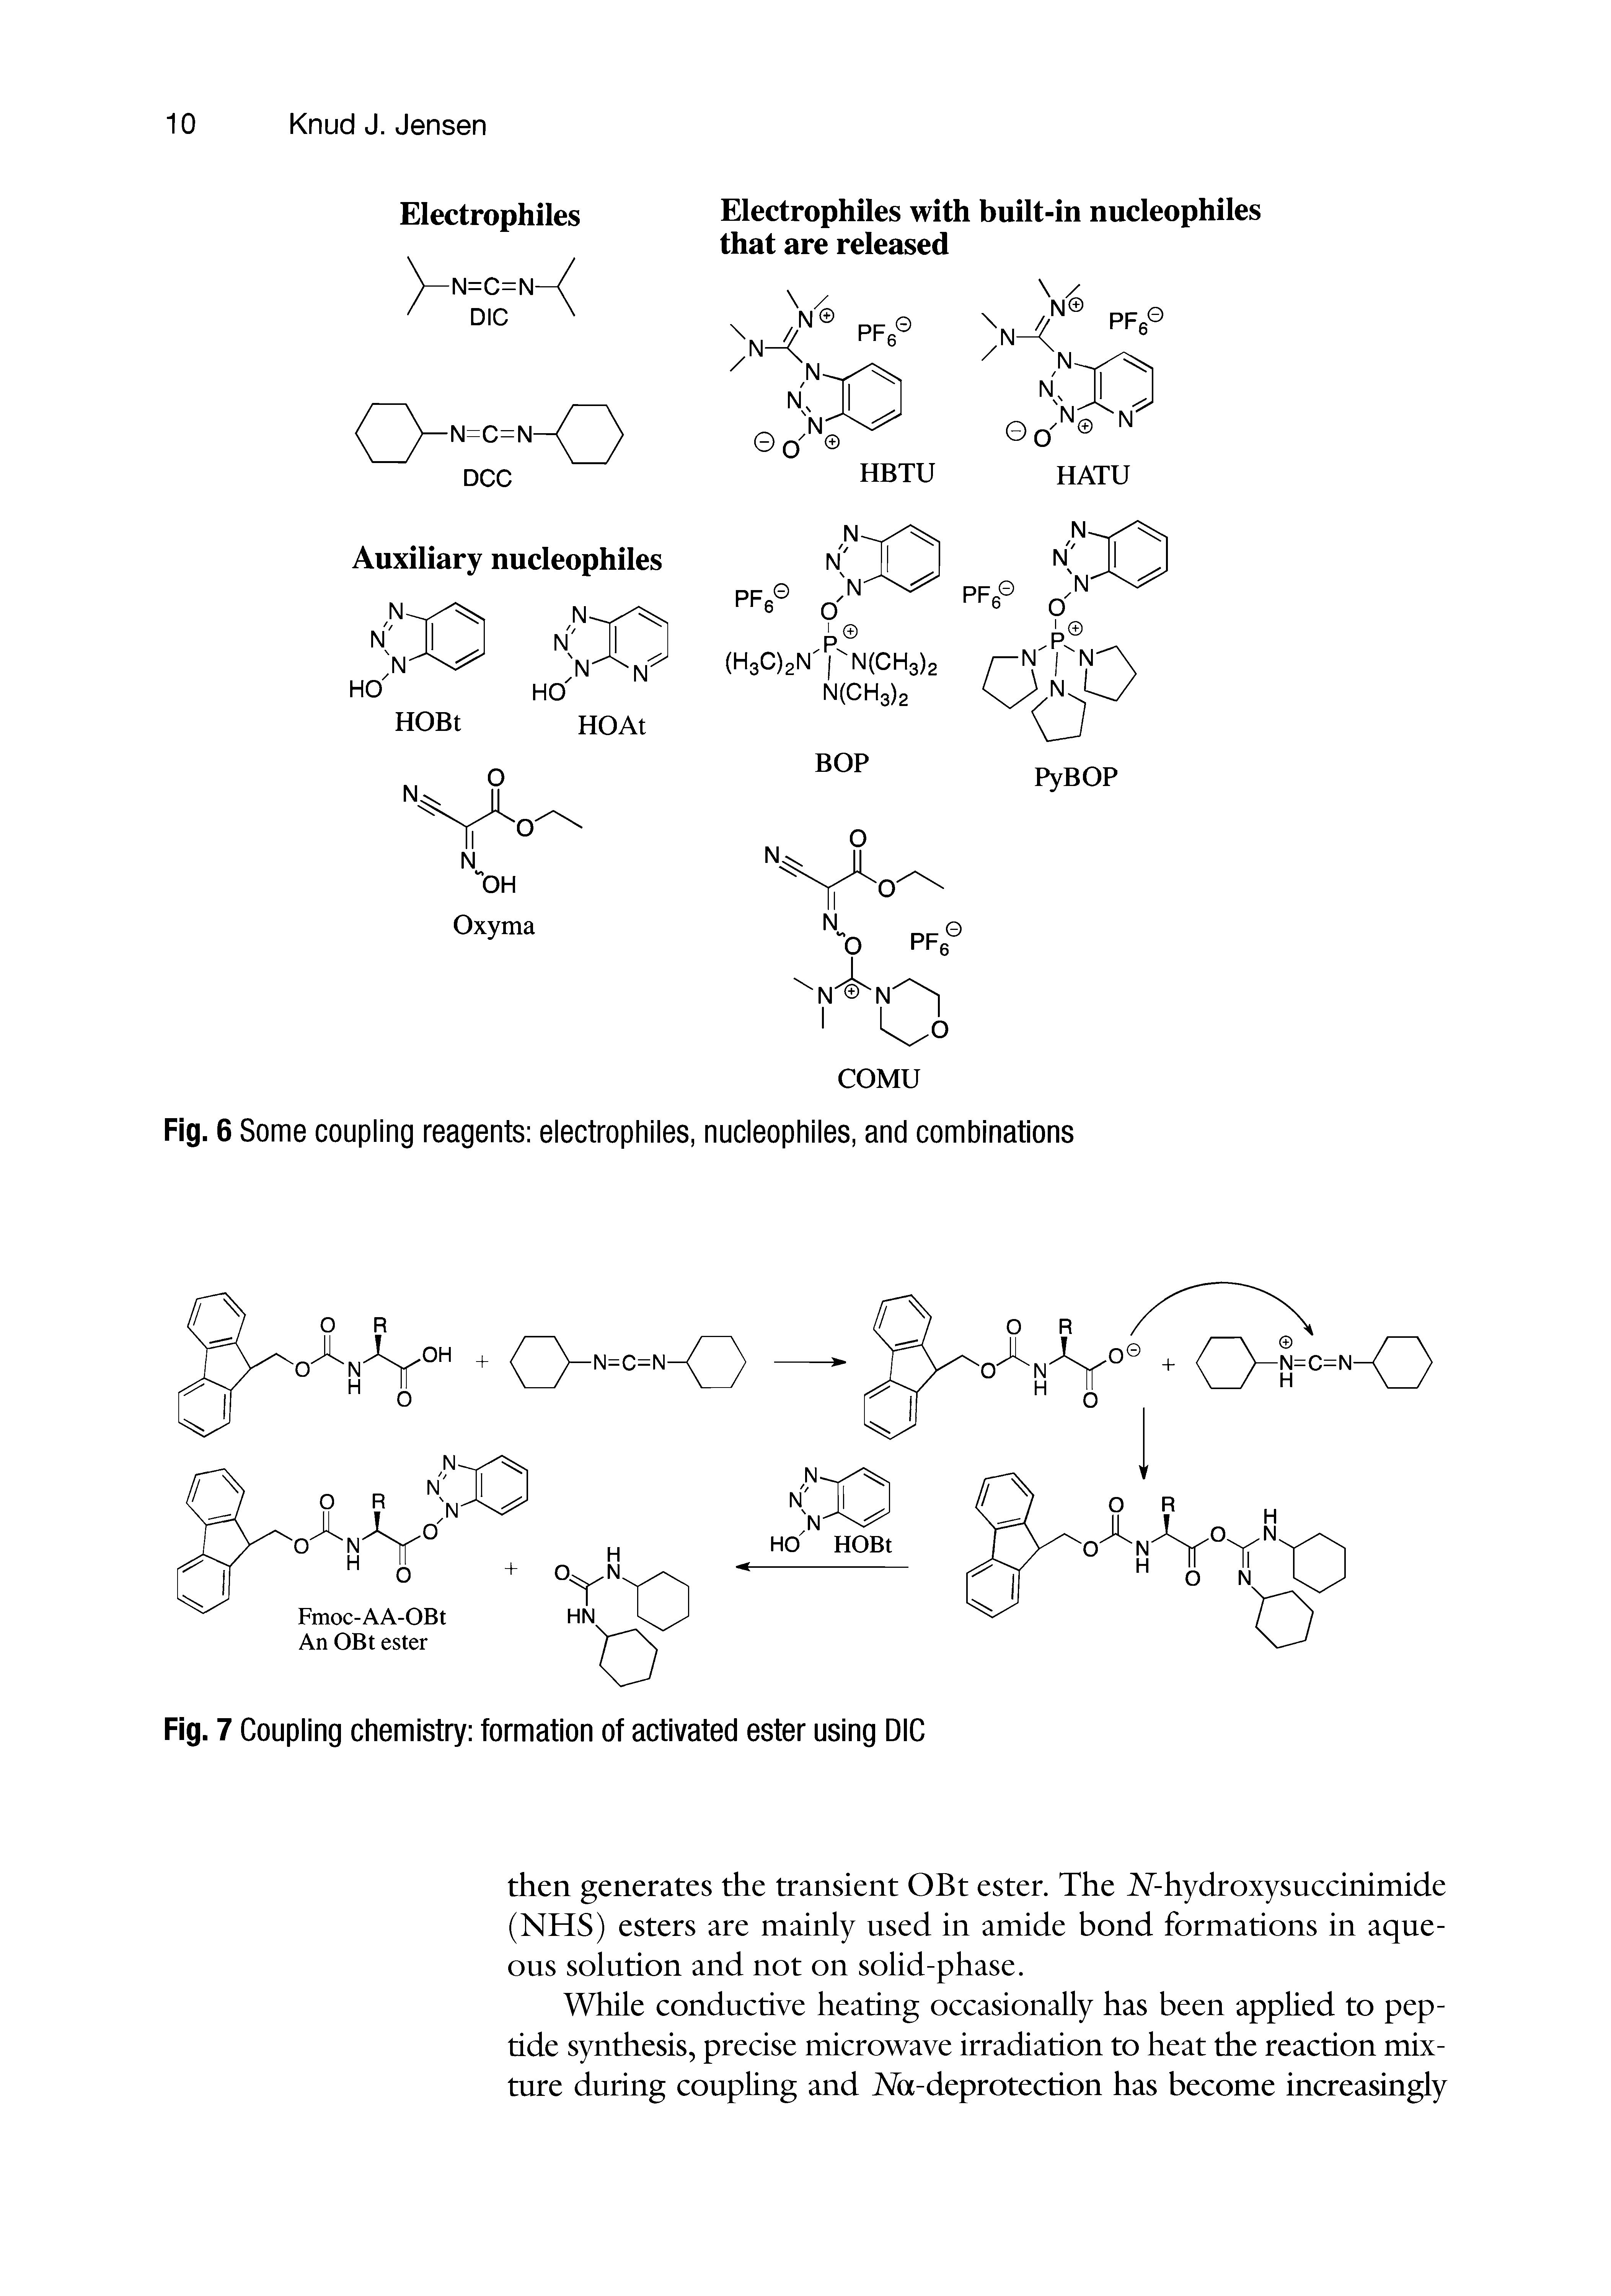 Fig. 6 Some coupling reagents electrophiles, nucleophiles, and combinations...